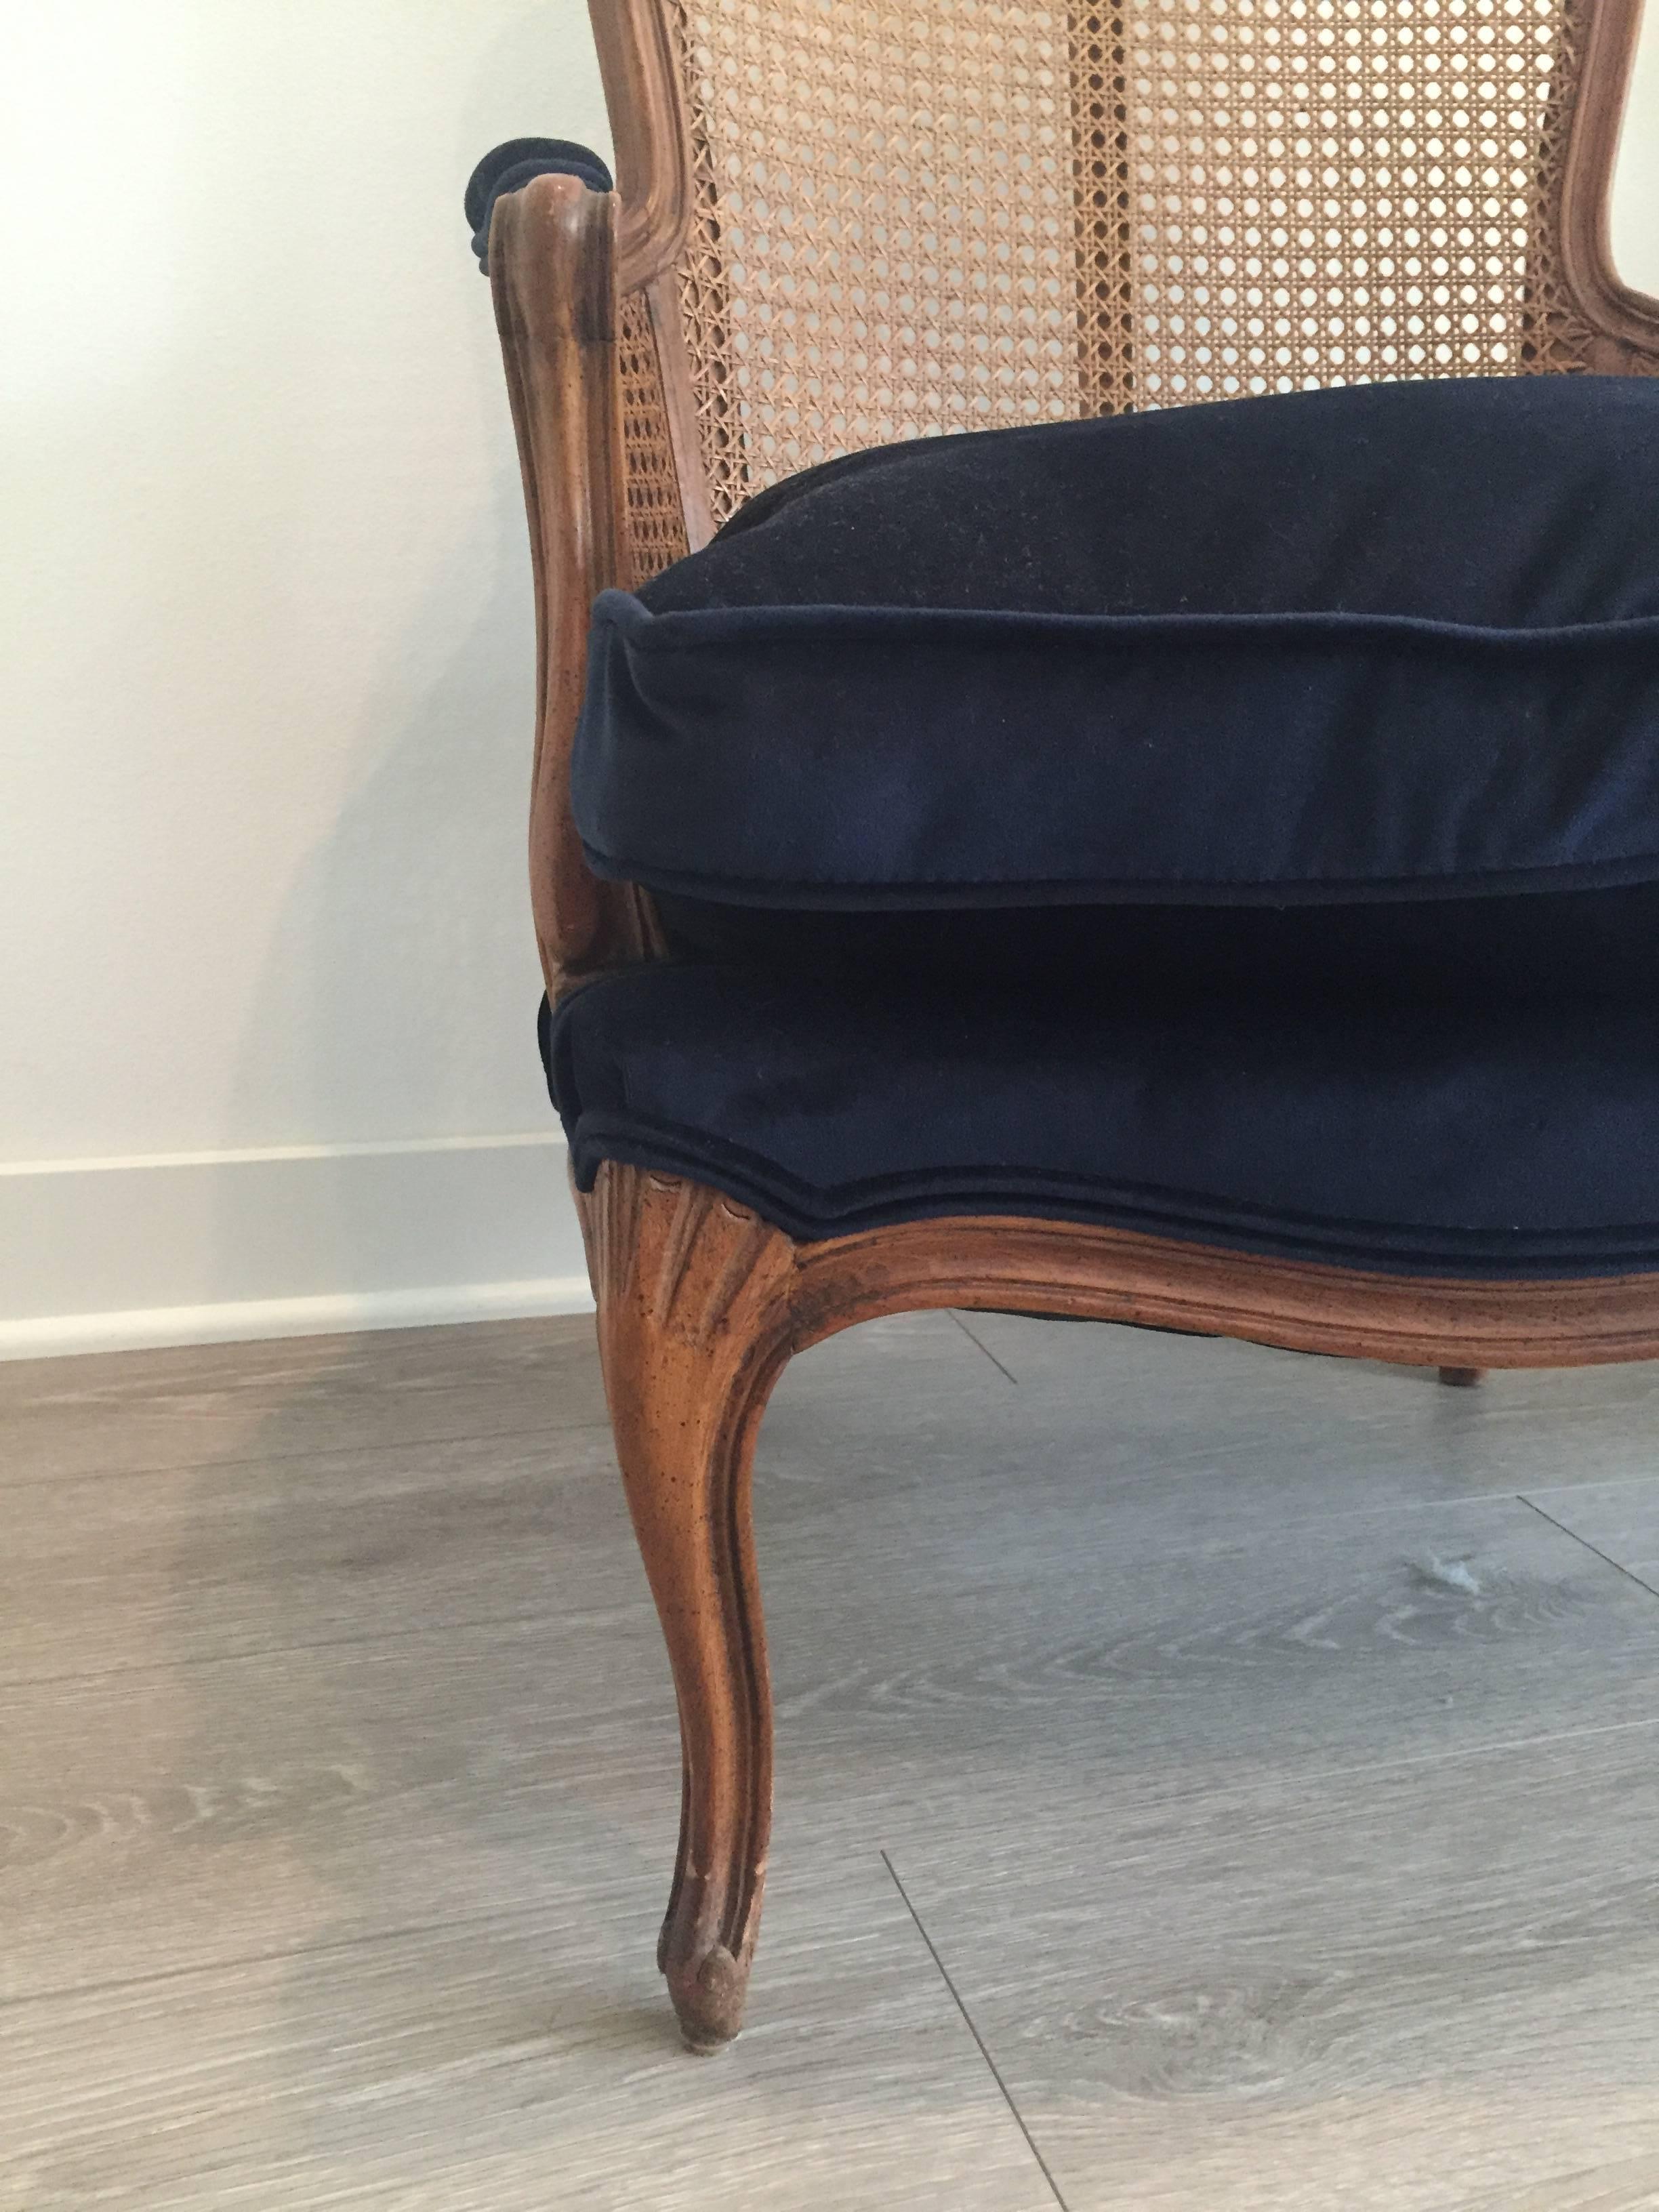 Caneback French Bergere in excellent condition. Seat and cushion have been newly upholstered in a lush midnight blue velvet. Down insert with zipper enclosure.